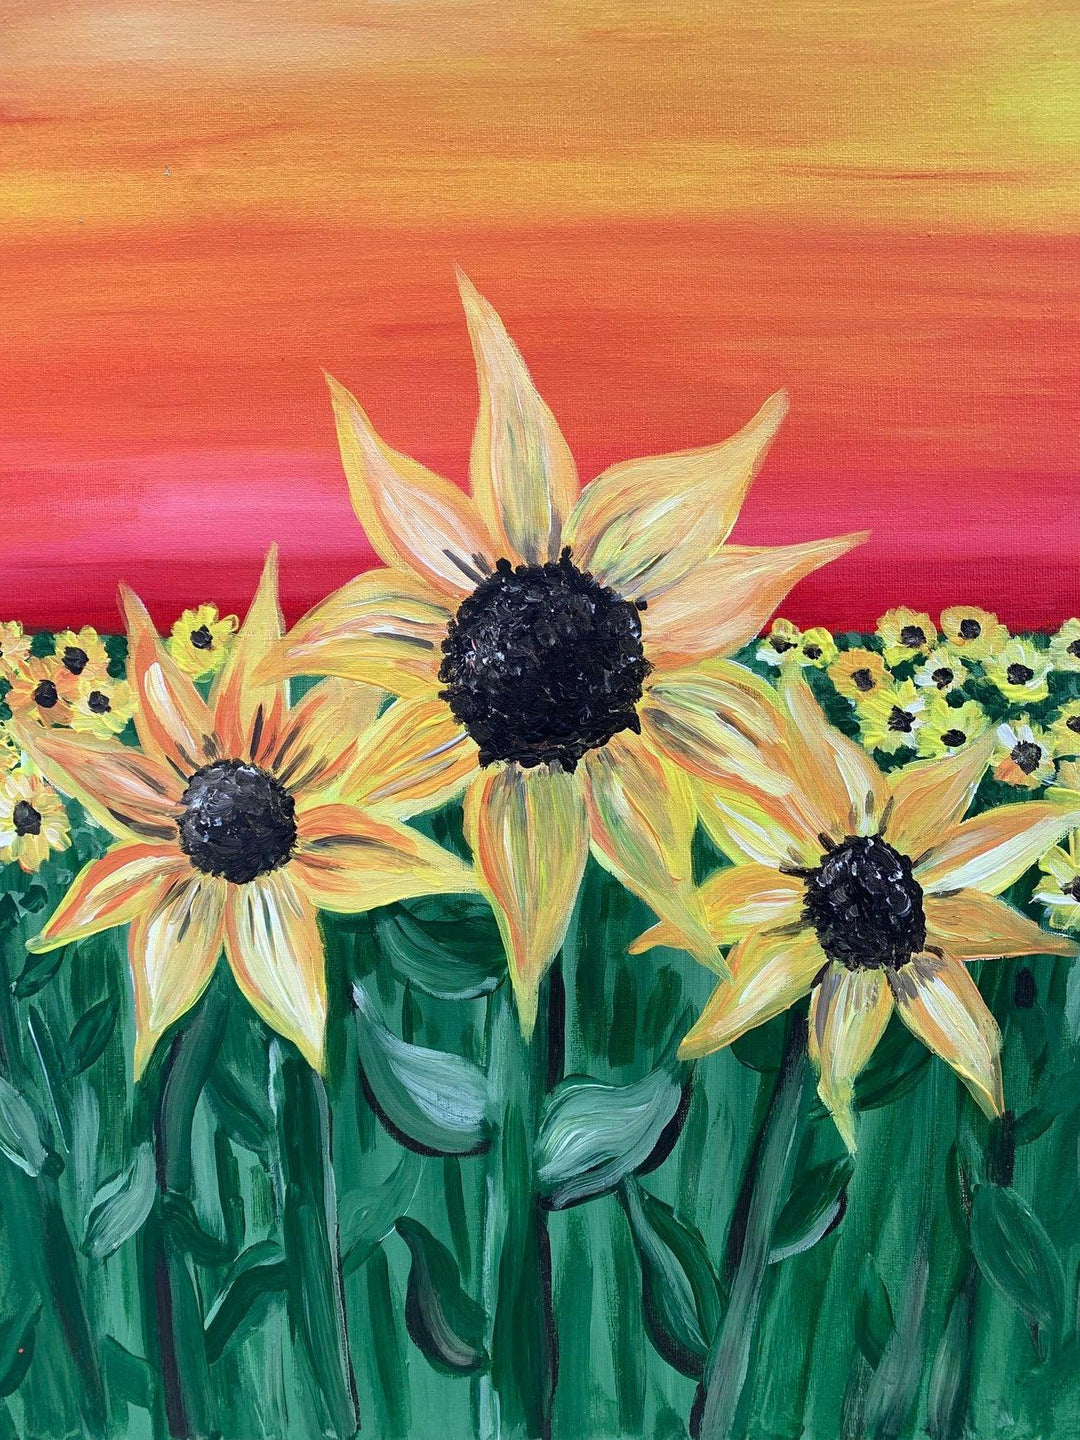 How To Paint a Sunflower: An Easy Tutorial For Beginners-Paint Juicy - Paint and Sip